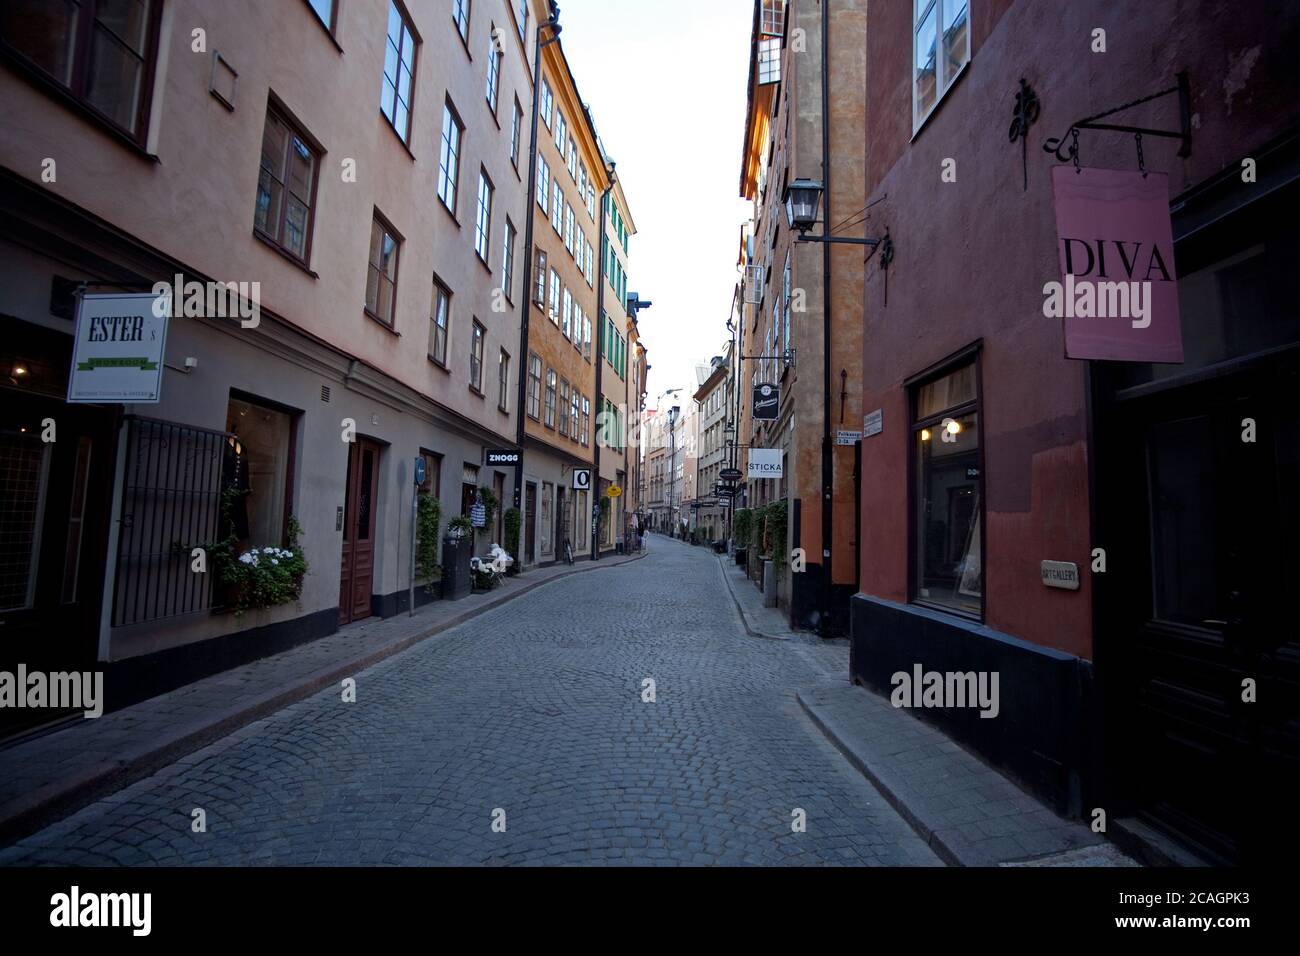 Stockholm, Sweden - June 11, 2020: An almost completely empty old town of Stockholm. Usually full of tourist a day like this in June. Now deeply affec Stock Photo